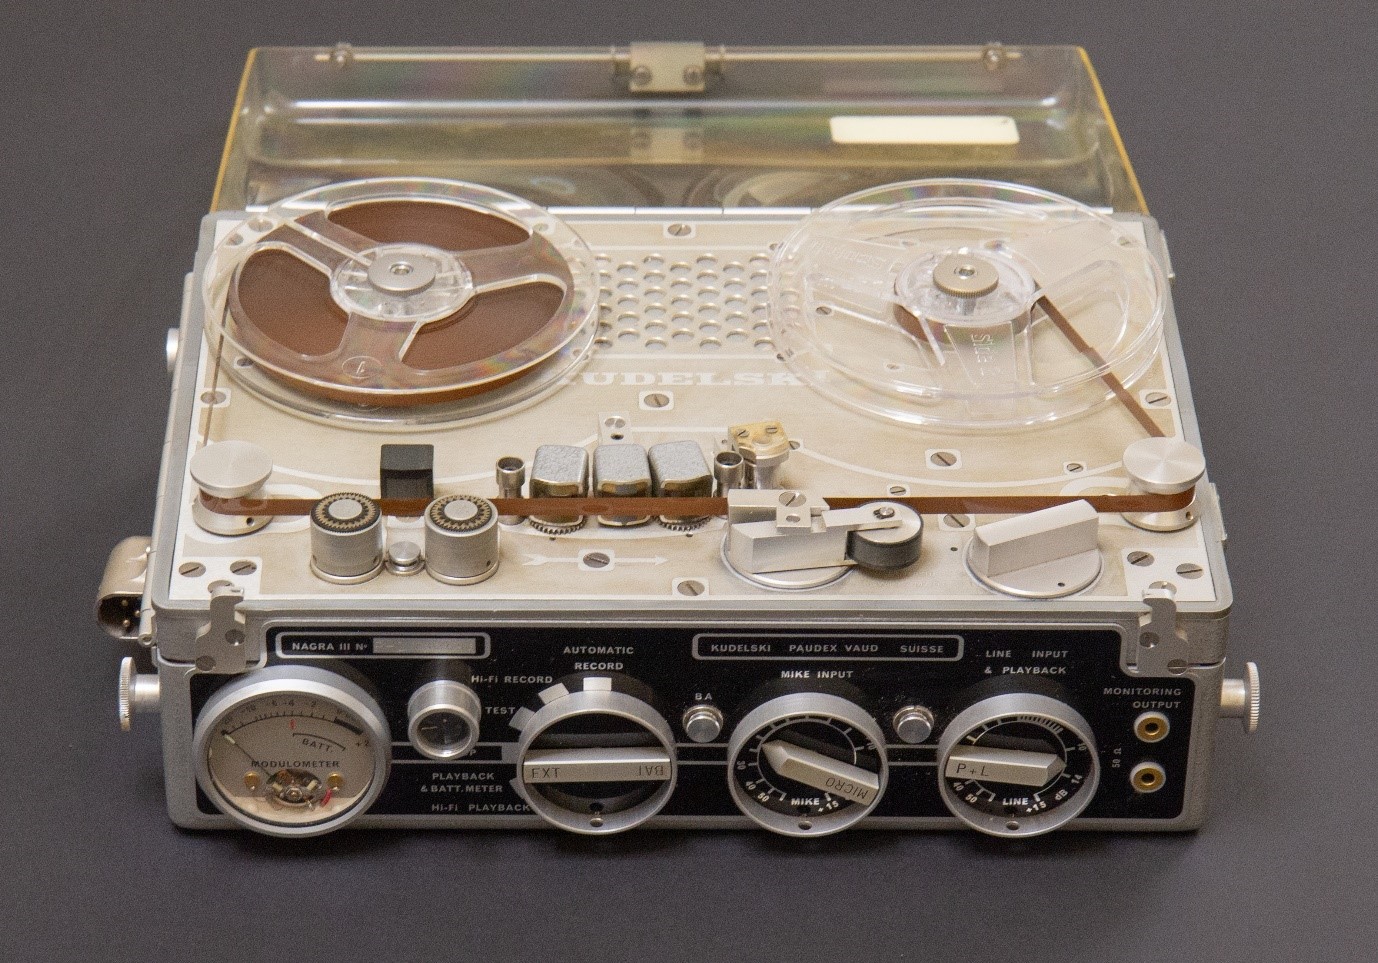 A nagra recorder. There are two reels on the top of the machine. On the front sde there are a series of dials